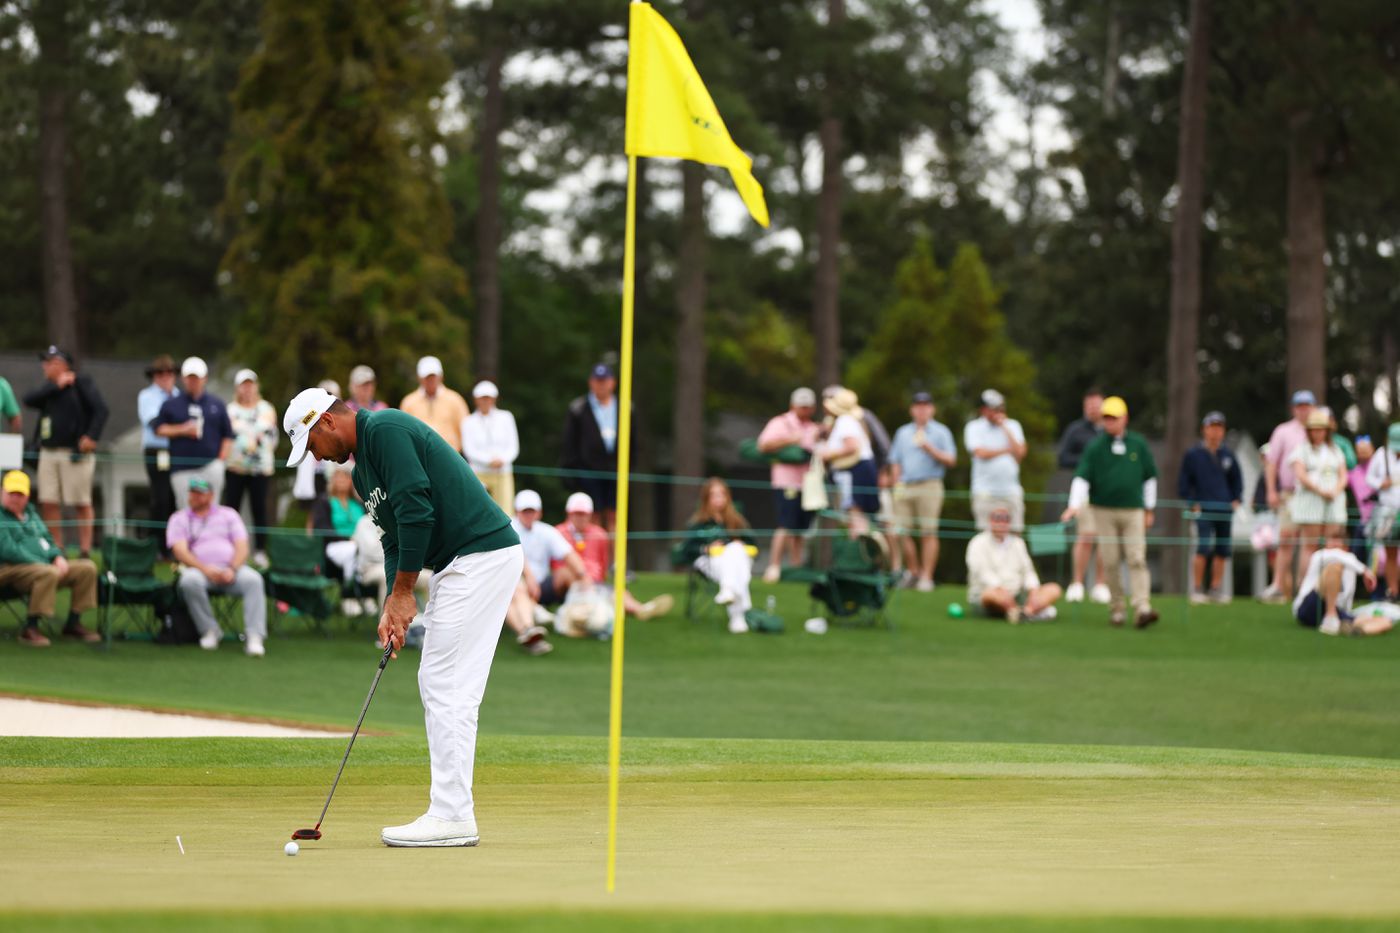 jason day ribs tiger woods at the masters upon learning of pairing